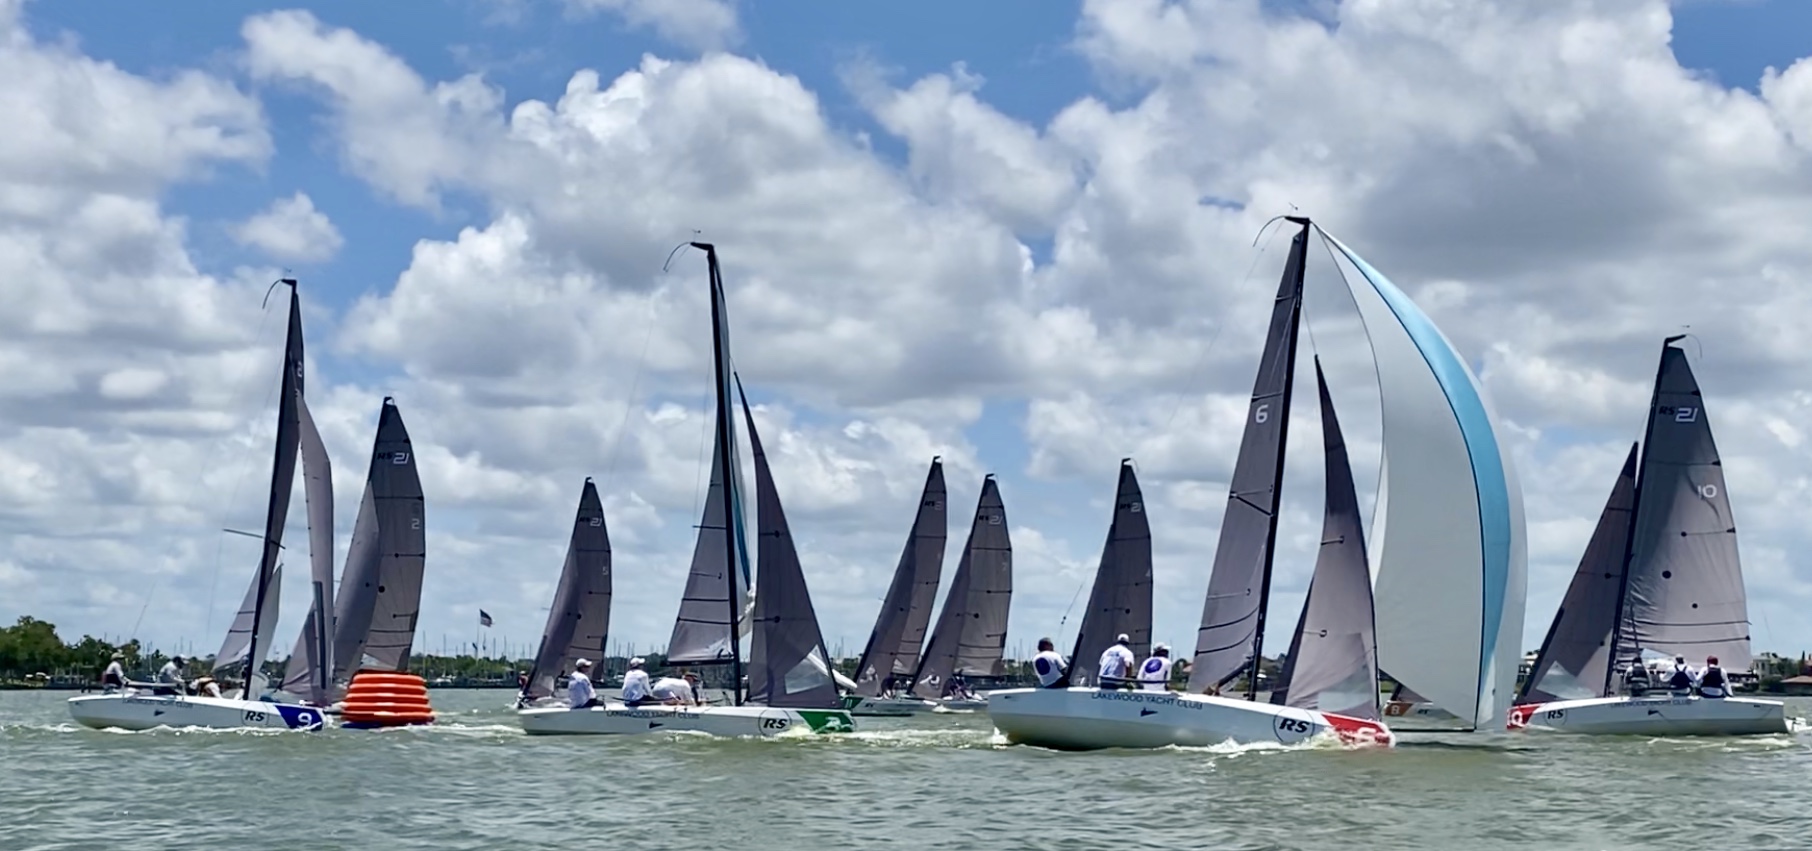 The Inaugural RS21 North American Championships